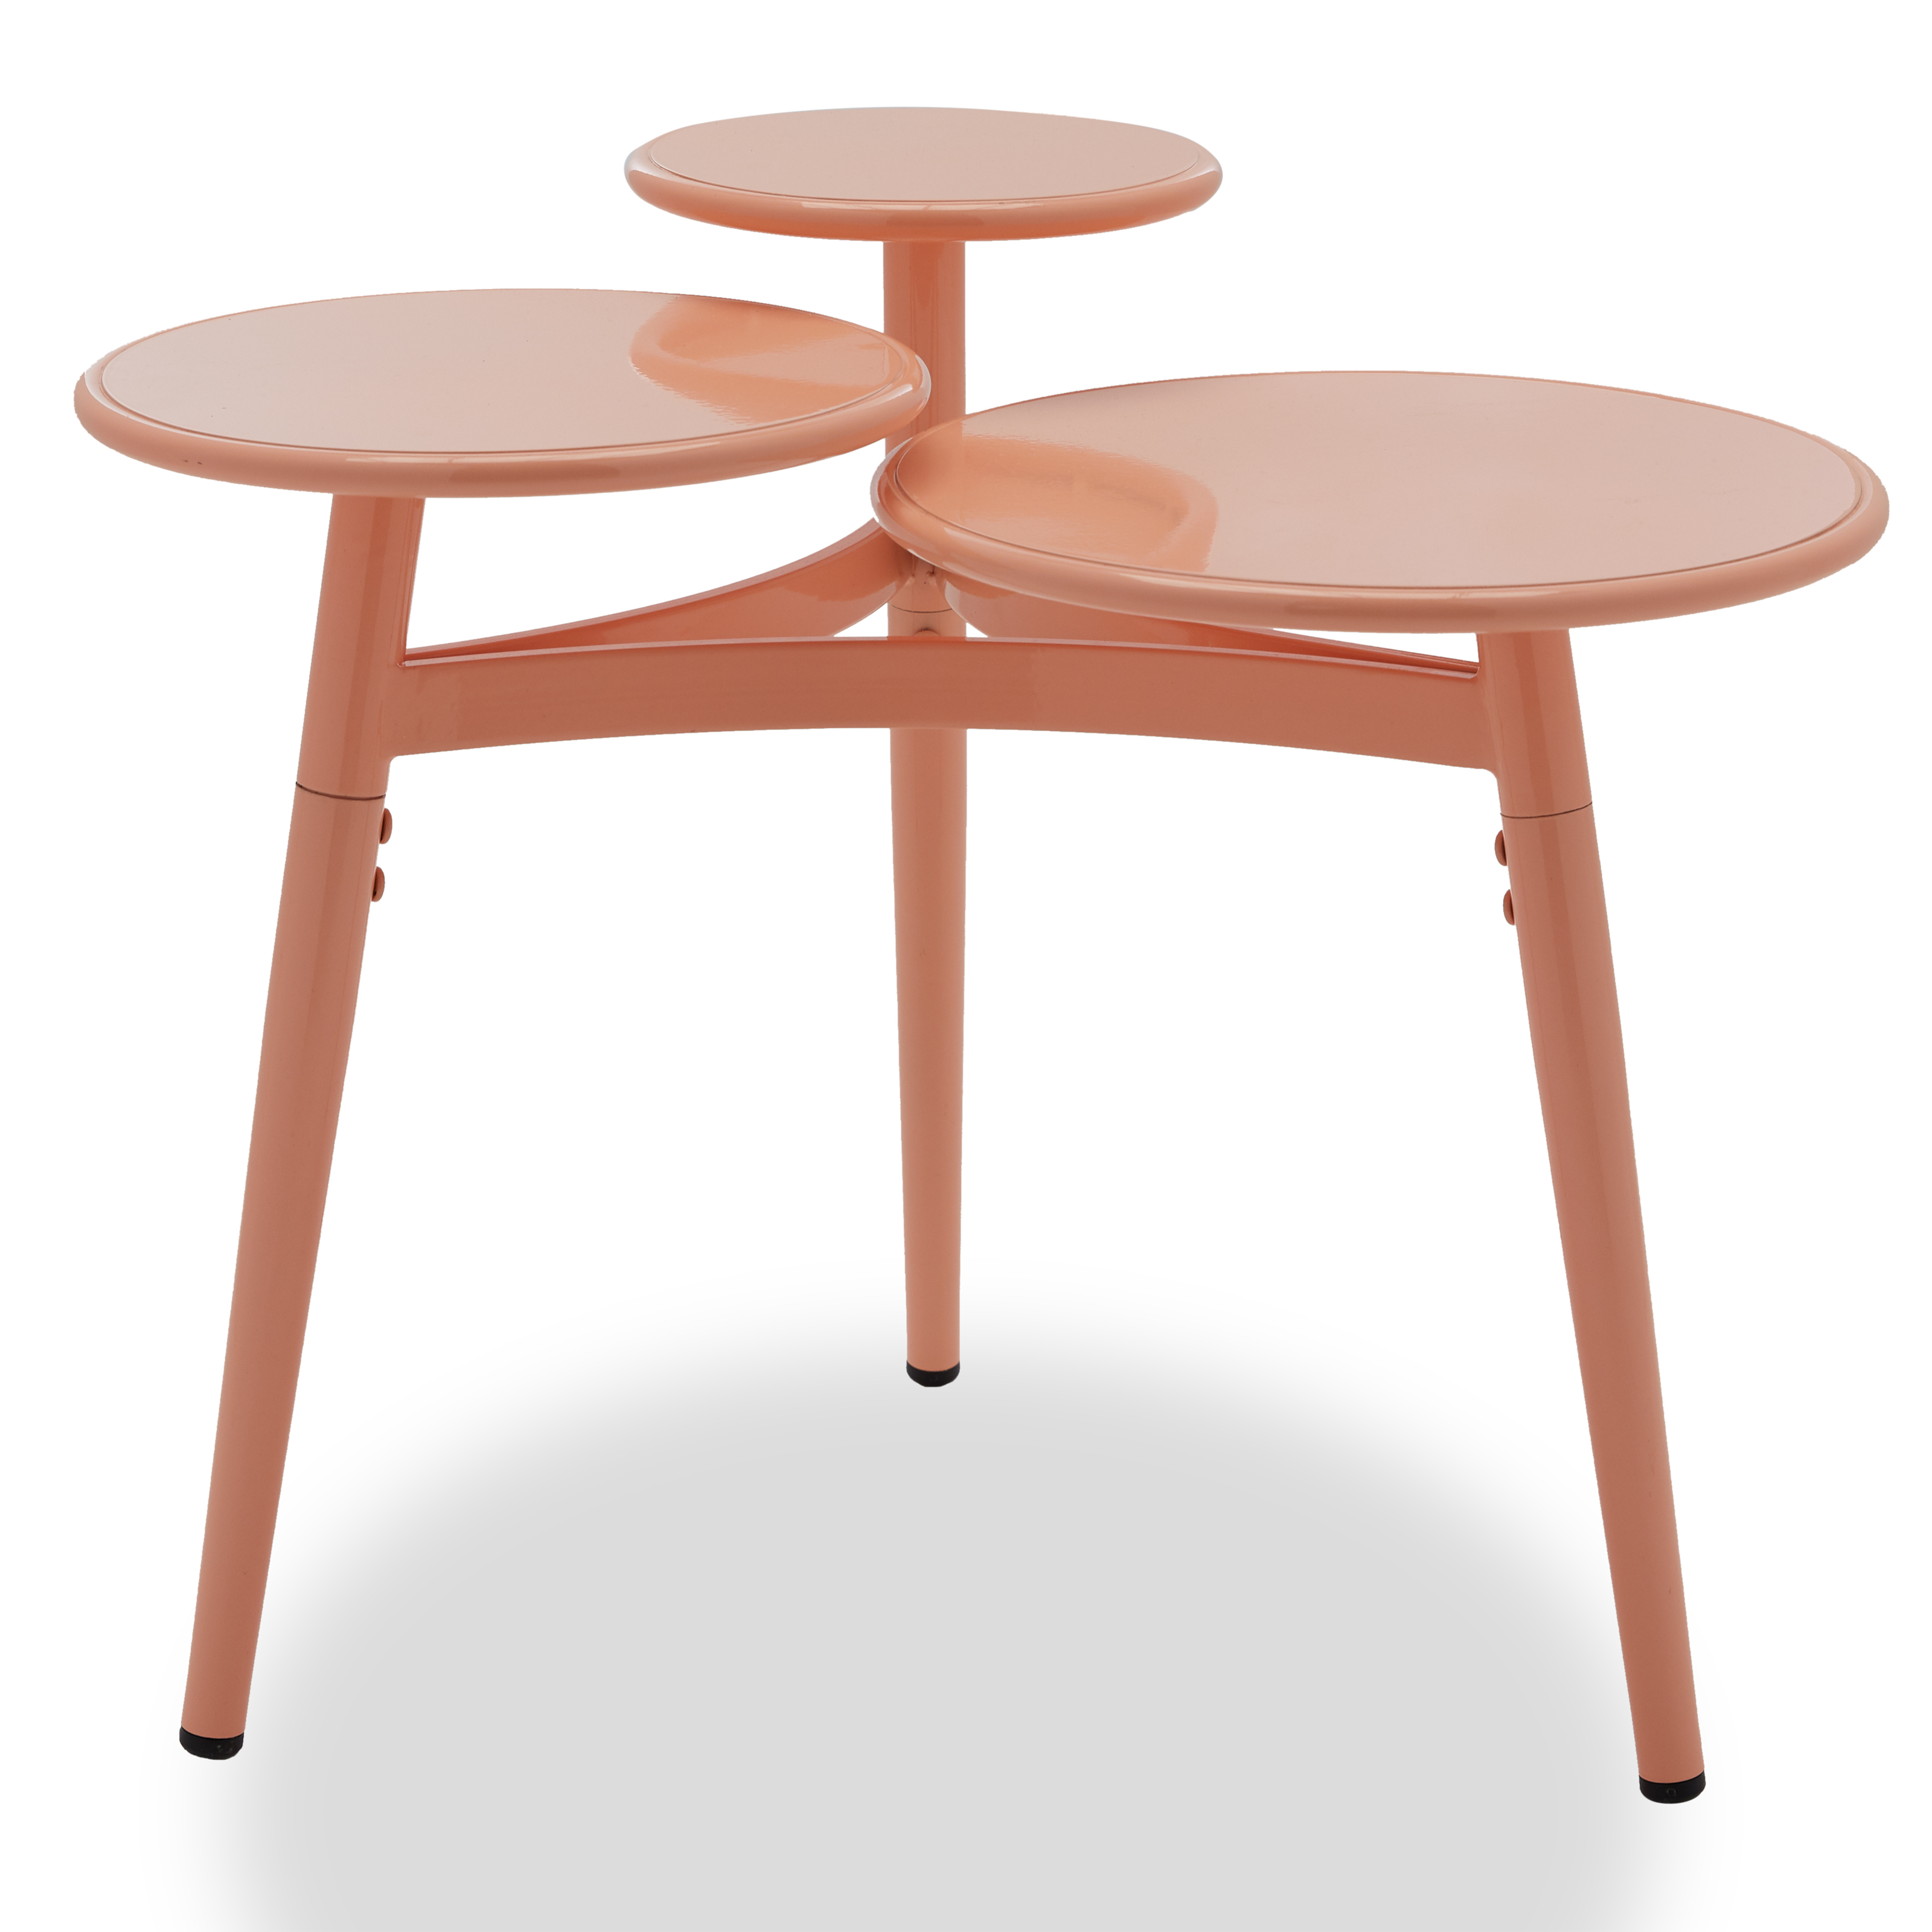 Multi-Tier Metal Accent Table, Multiple Colors by Drew Barrymore Flower Home - image 1 of 16